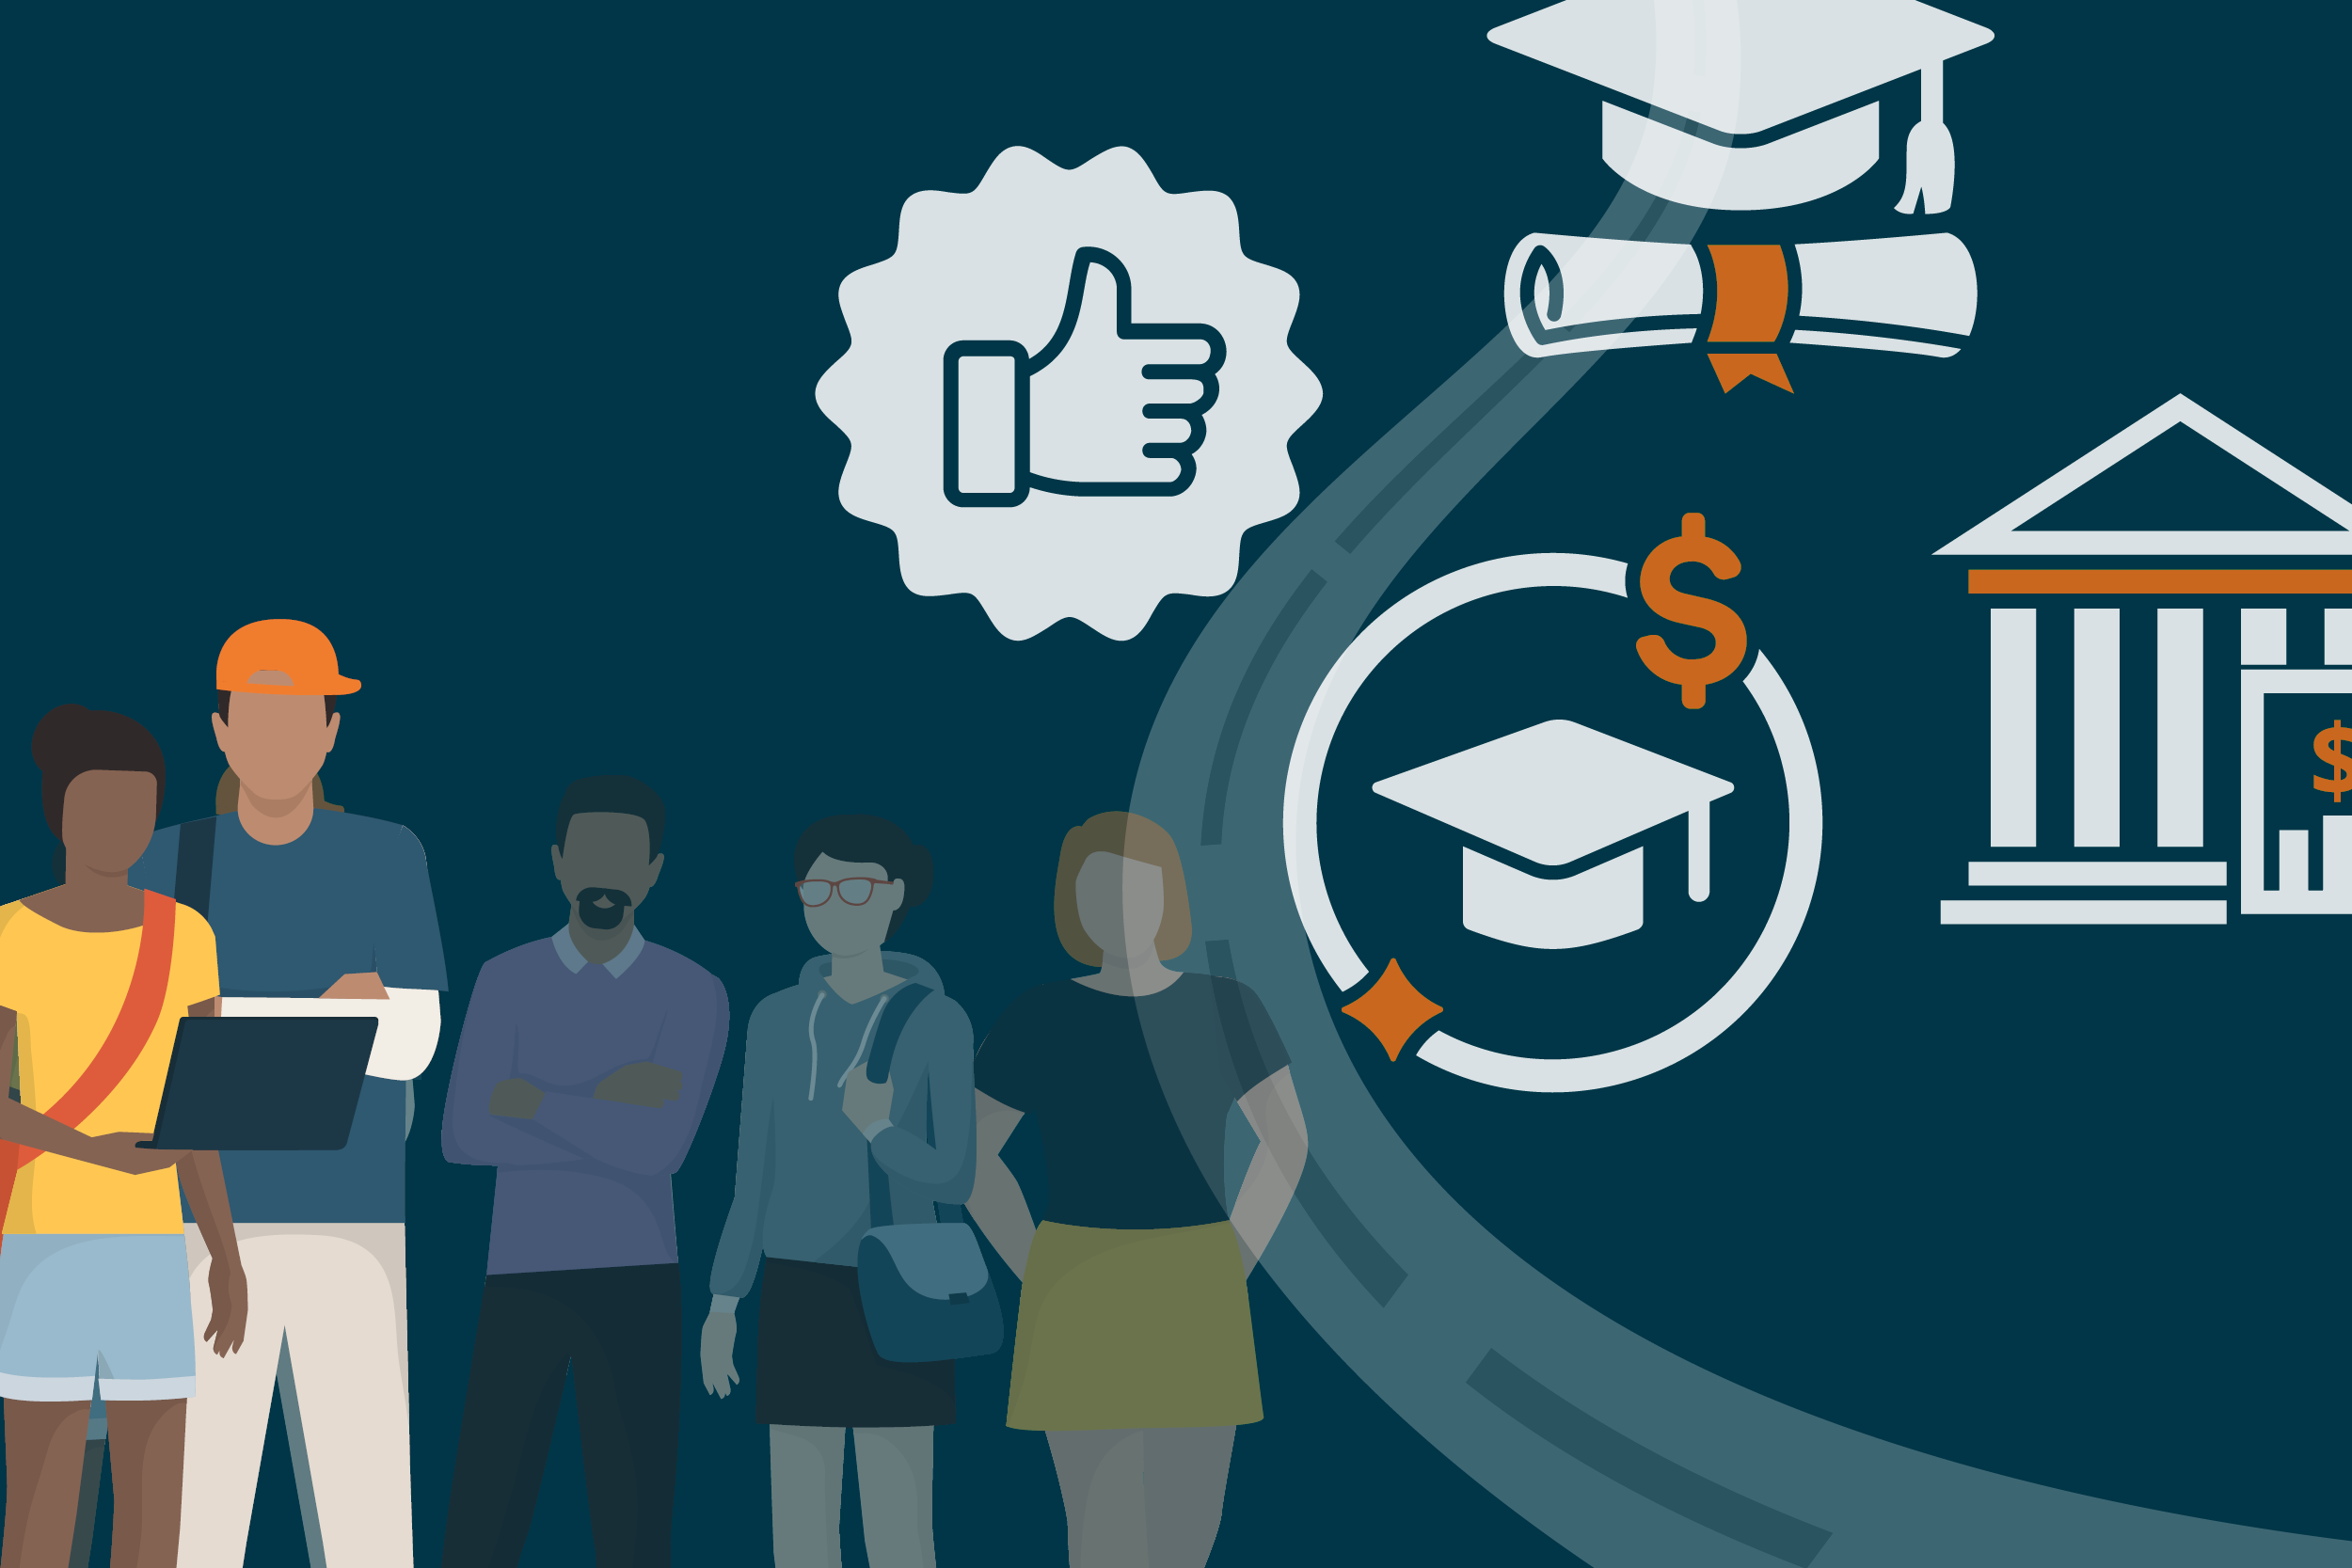 4 Ways That Investing in Campus Mental Health Pays Back [Infographic]